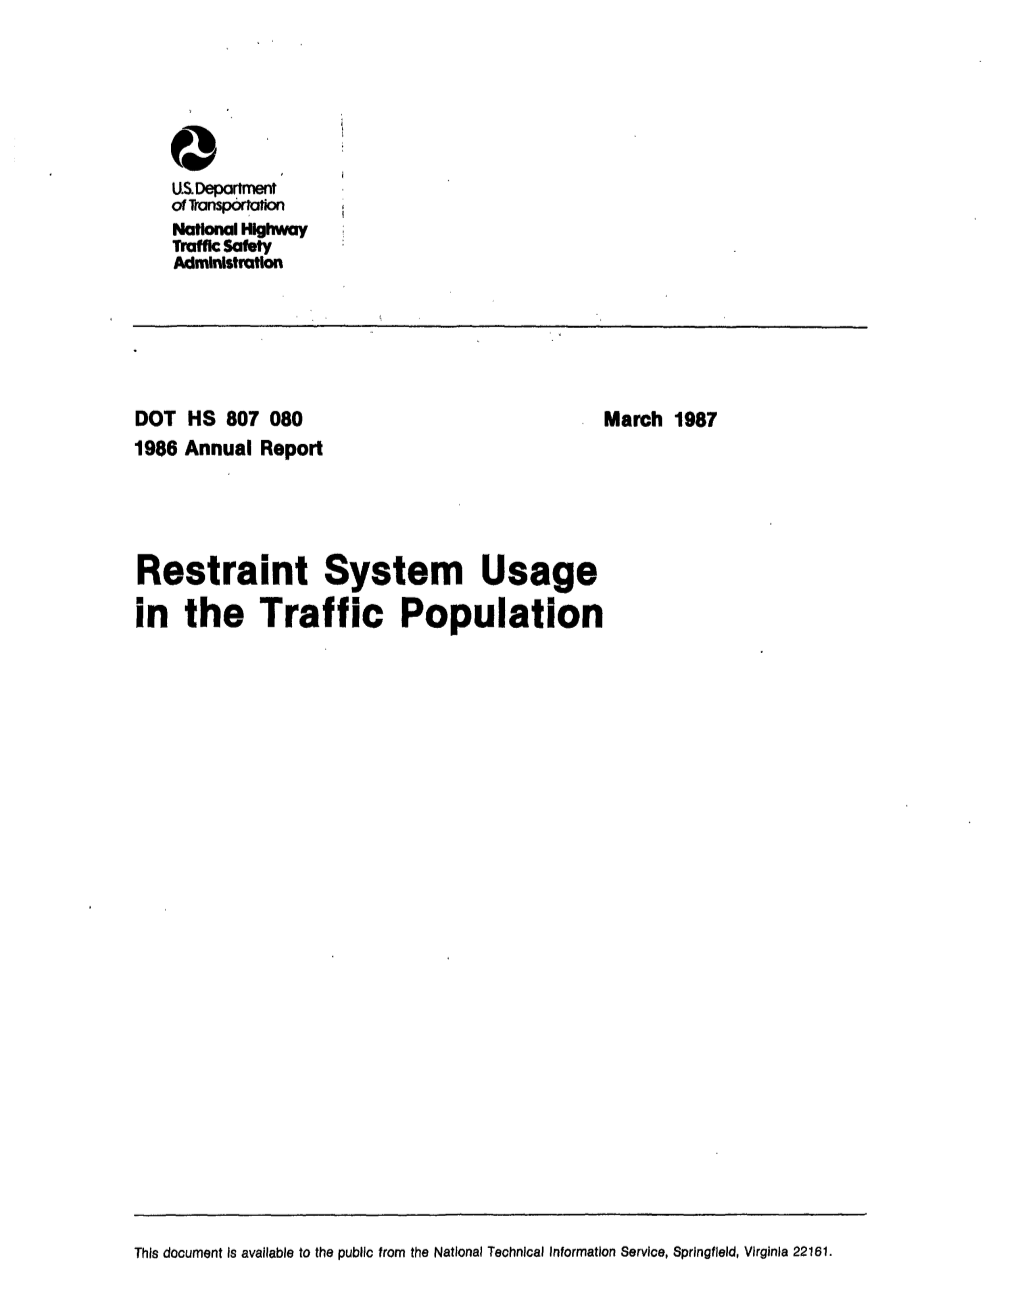 Restraint System Usage in the Traffic Population